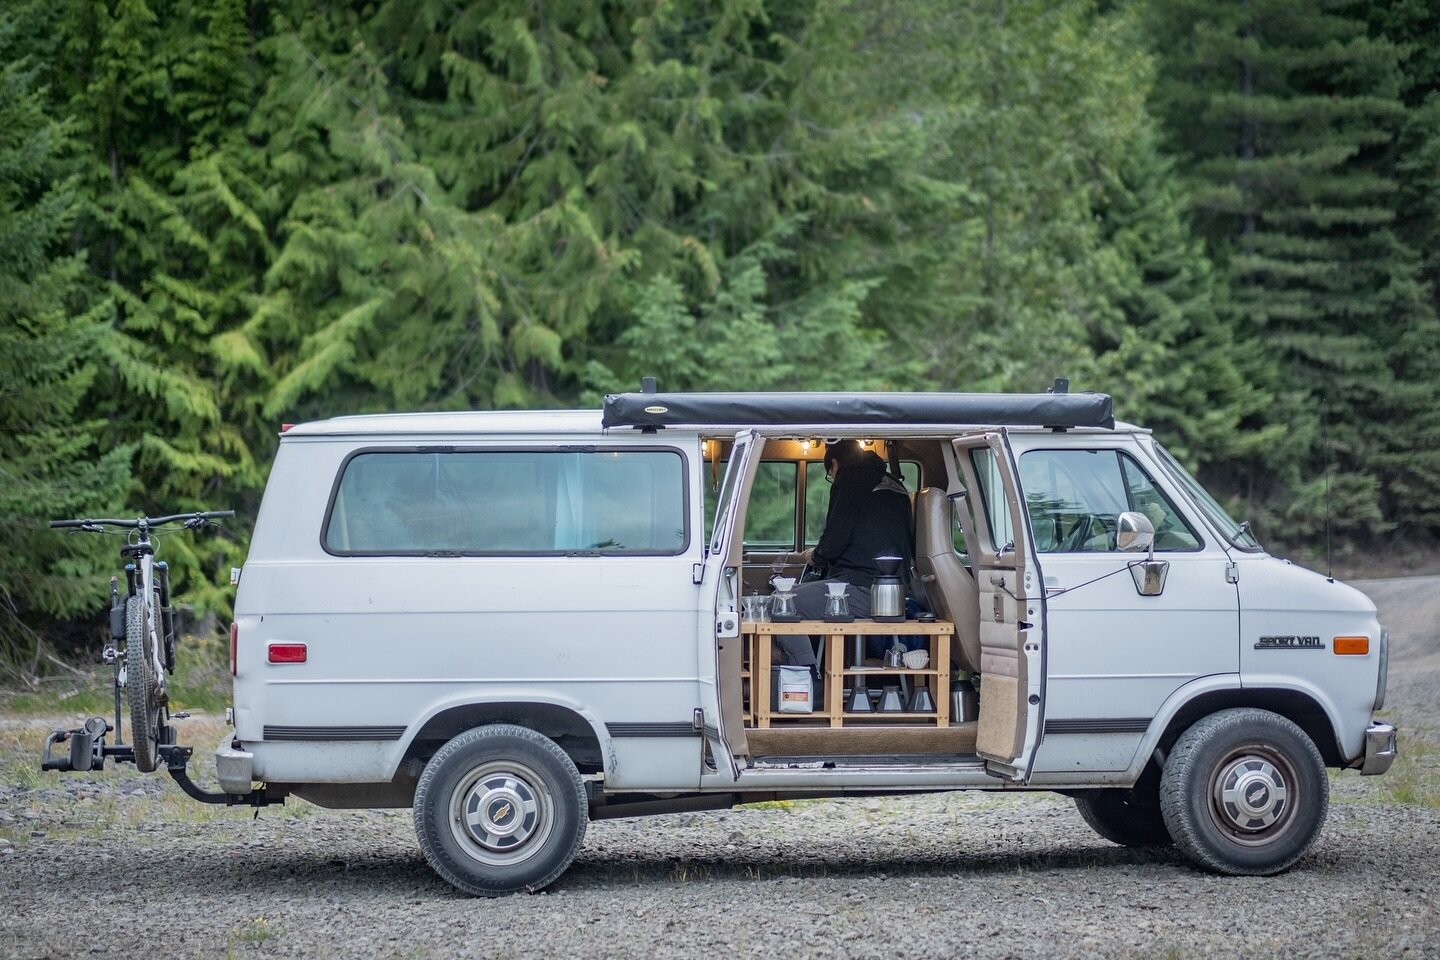 SAD NEWS ... Nacho the Van was stolen. If you're around Portland and see Nacho, please drop us a DM. The timing isn't good as we were working on ramping up coffee catering for events.

However, there is still good news in all of this. The suspects ha